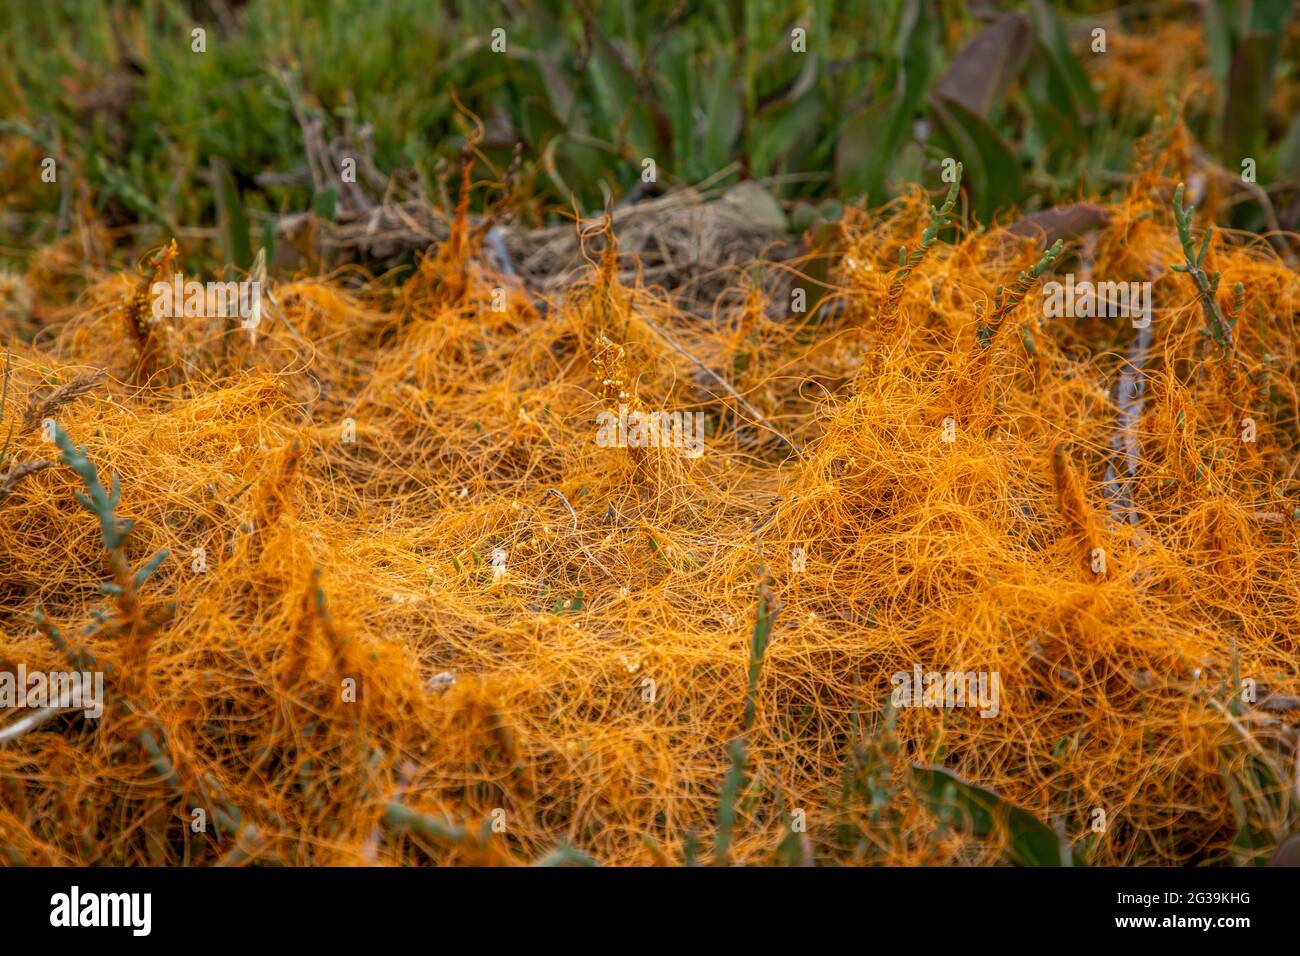 Dodder plant found around Tomales Bay. The bay is a long narrow inlet of the Pacific Ocean in Marin County, California. Much of the surrounding area i Stock Photo